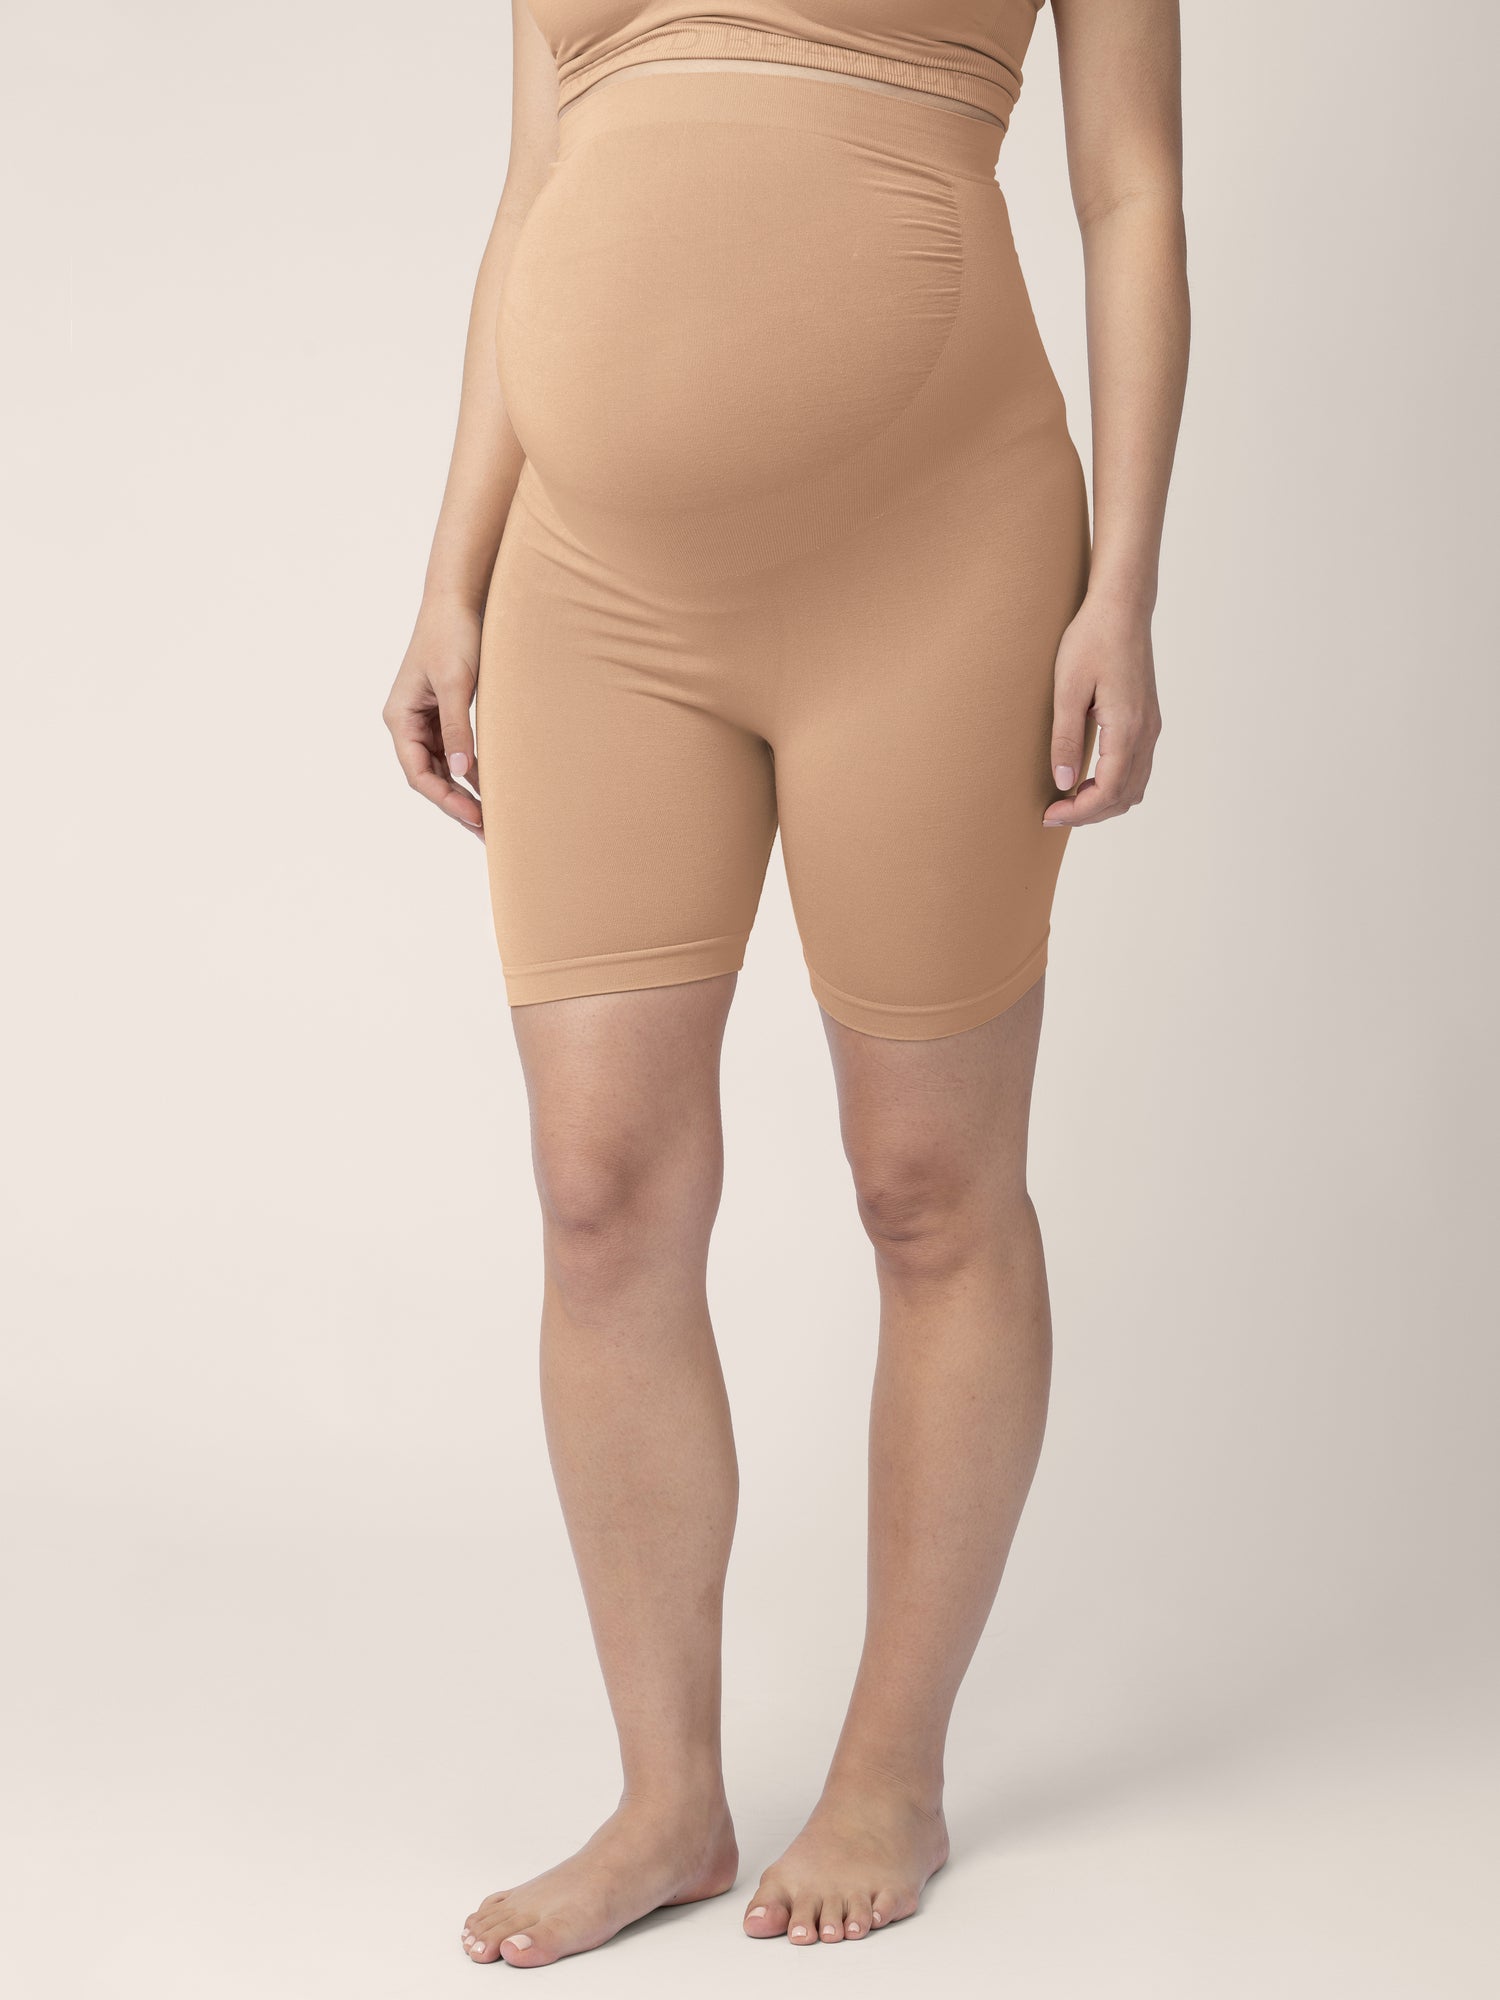 Seamless Maternity Shapewear for Dresses, Mid-Thighs Pregnancy Underwear,  Pregnancy Must Haves, S-XXXL